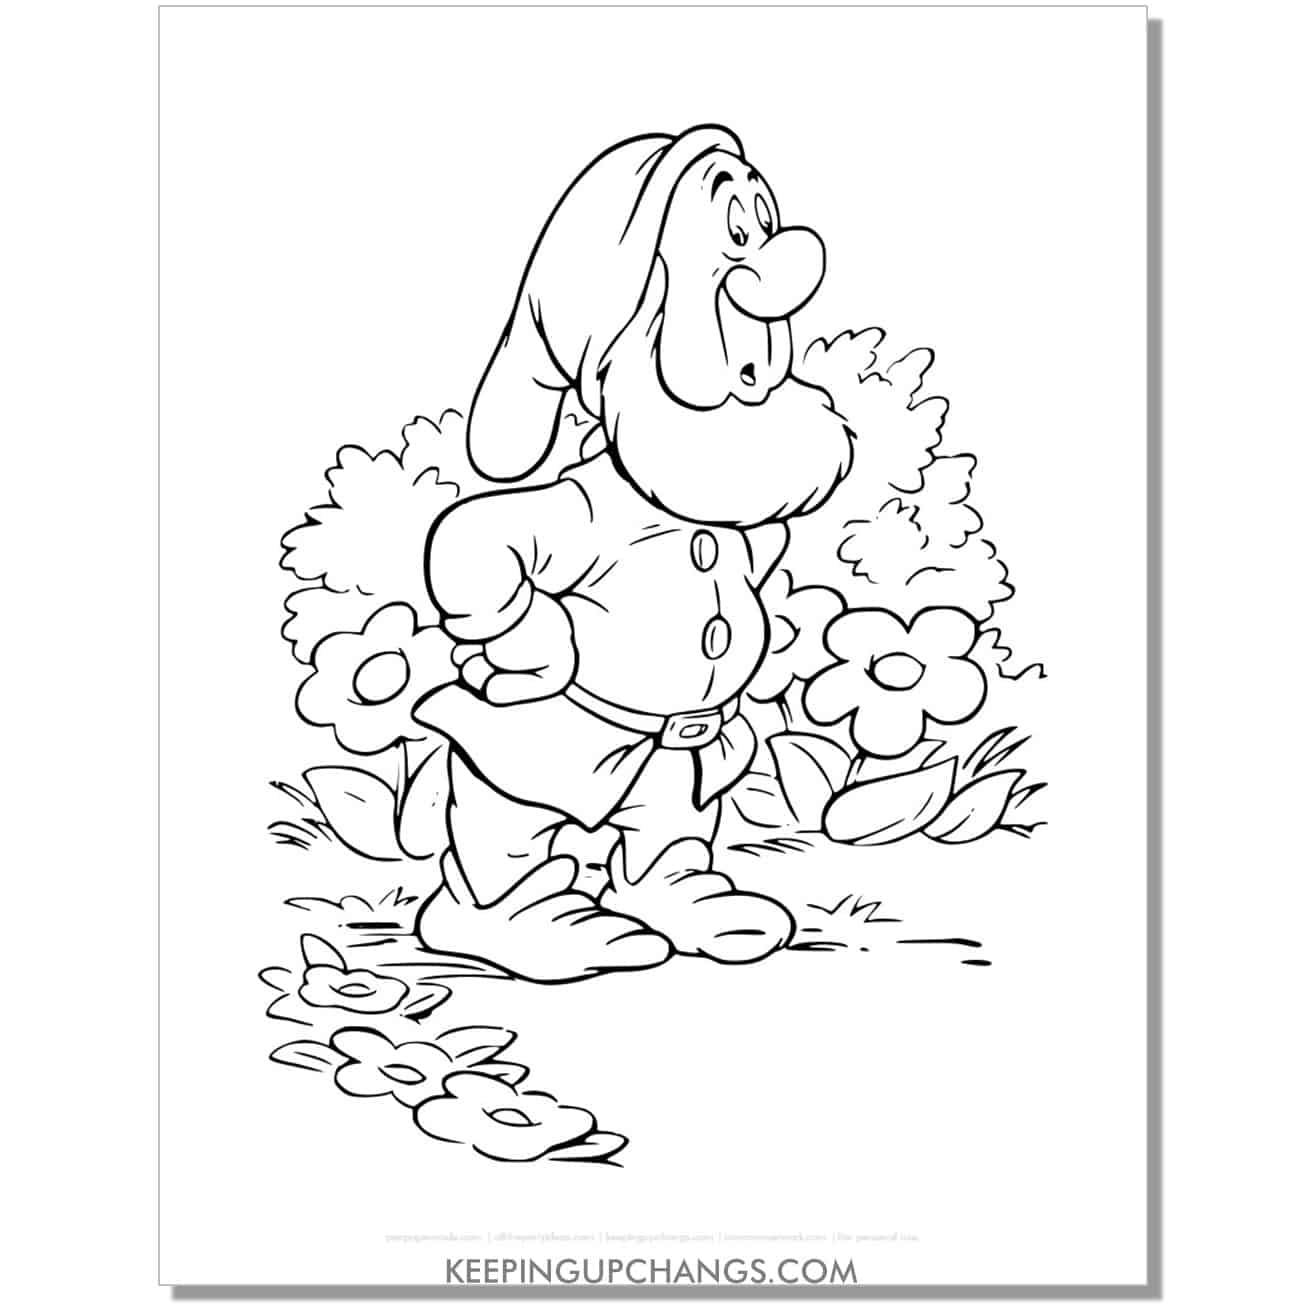 snow white dwarf sneezy in garden coloring page, sheet.